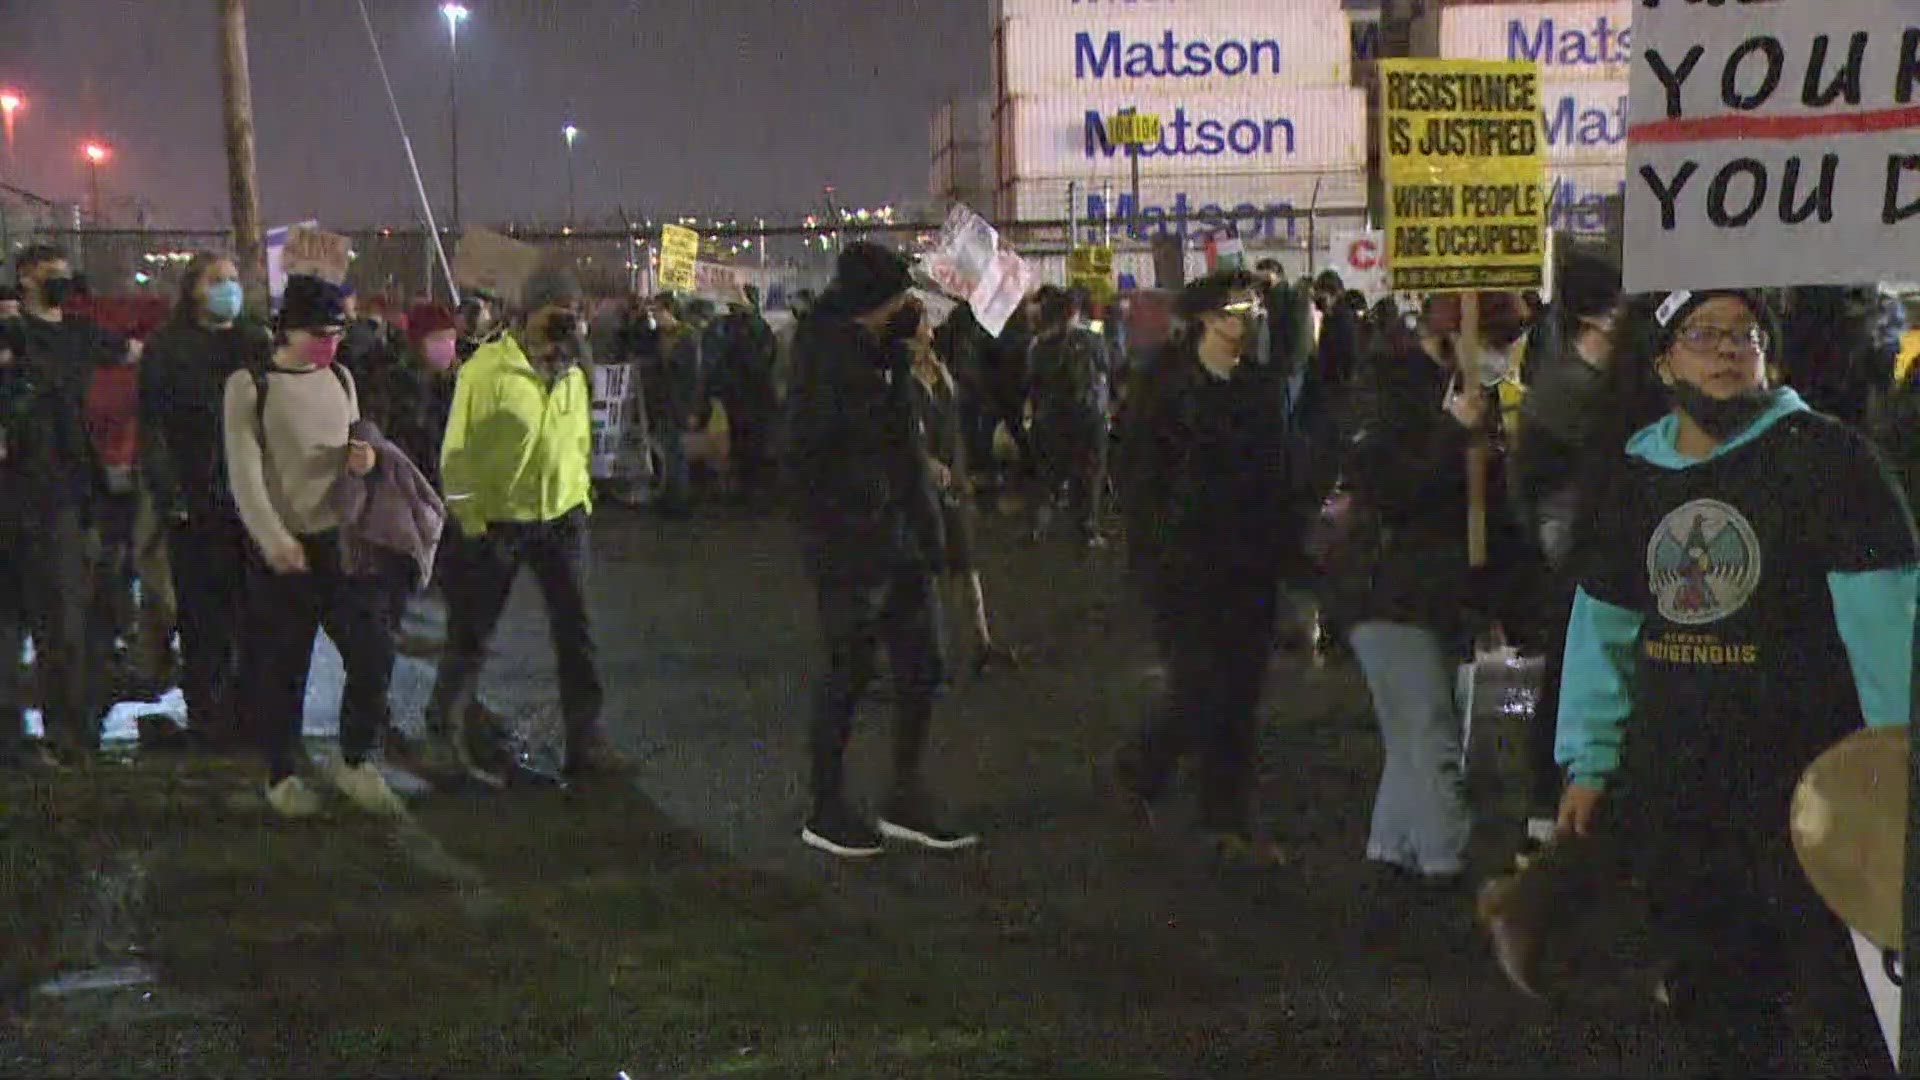 A protest is growing in the Port of Tacoma.  Organizers claim weapons headed to Israel are being shipped directly from the port. KING 5 can not confirm those claims.